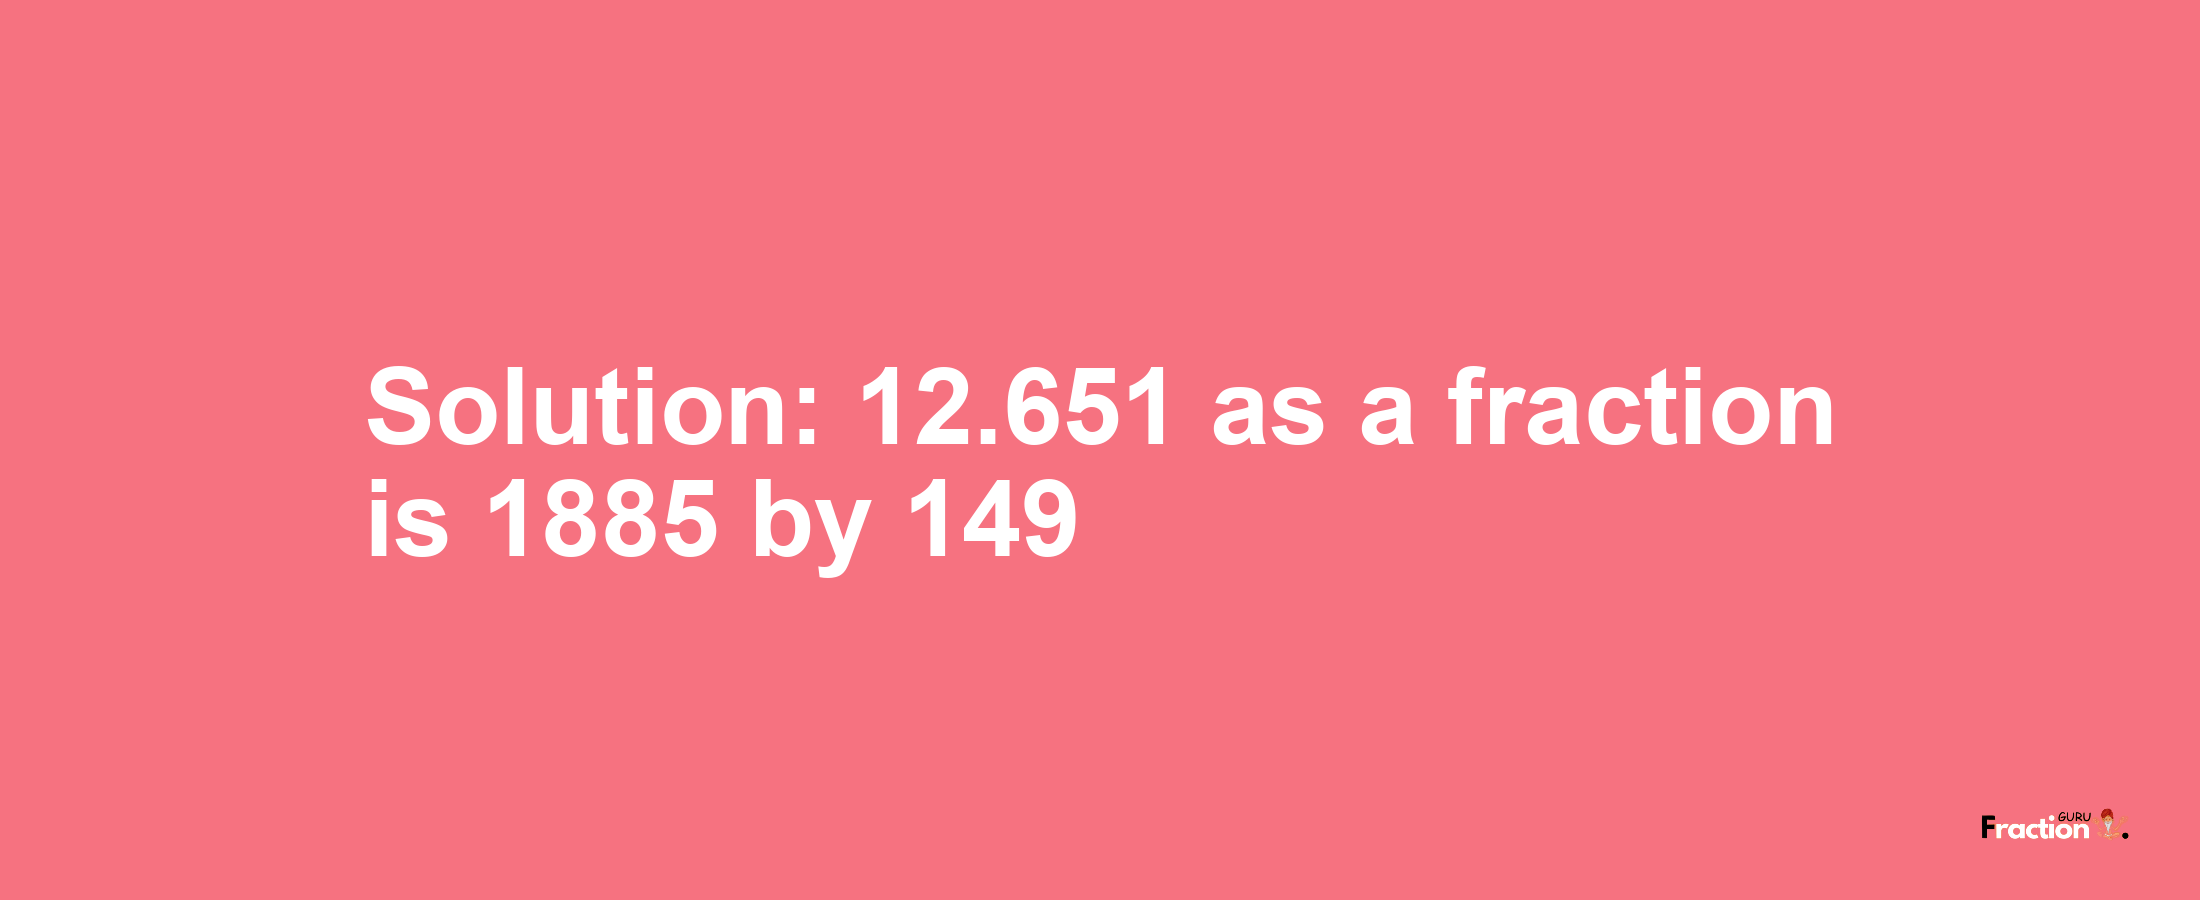 Solution:12.651 as a fraction is 1885/149